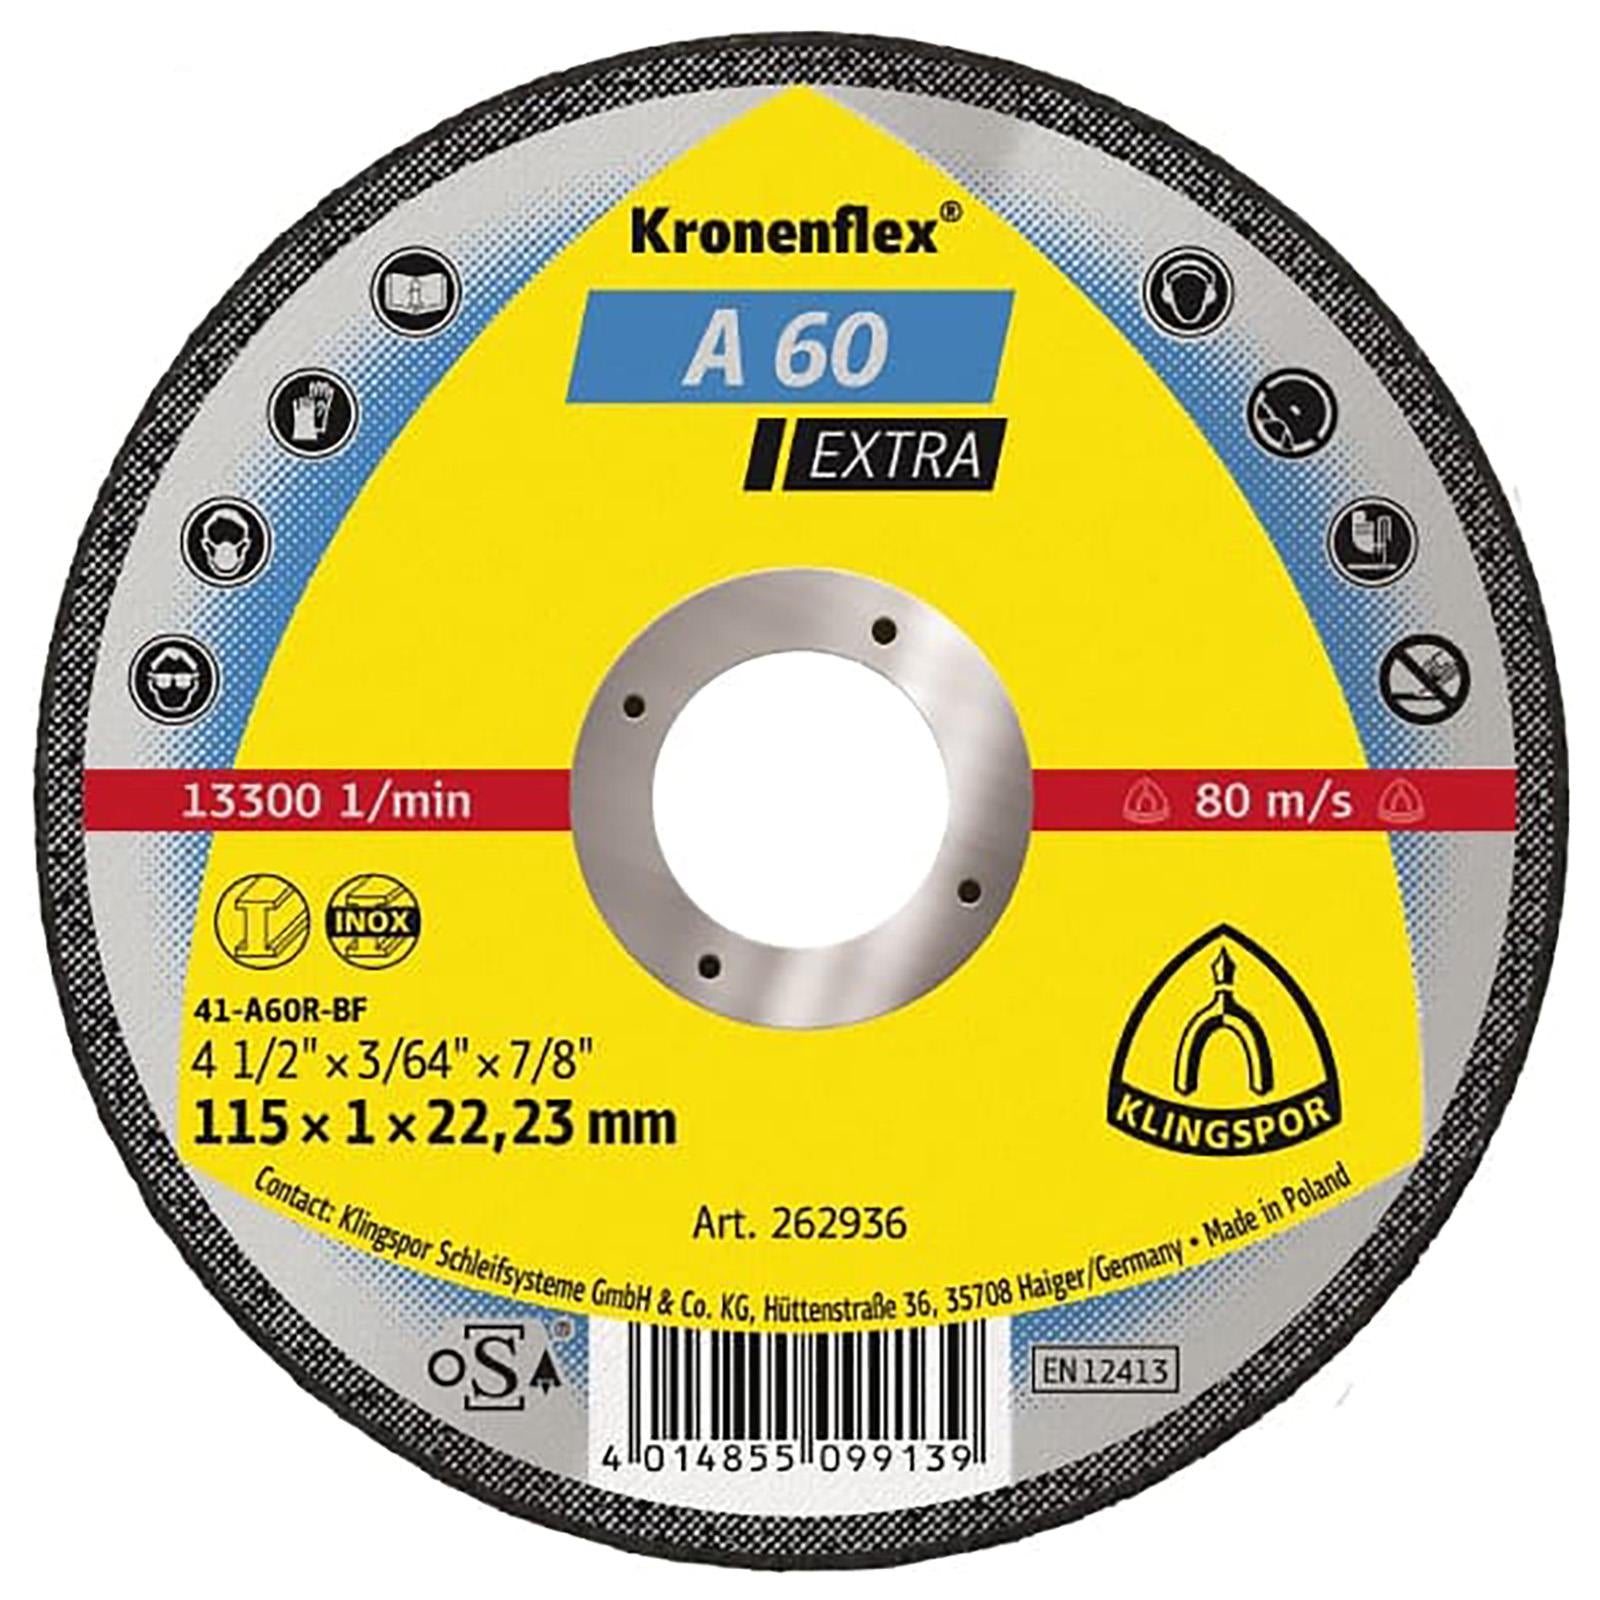 Klingspor Cutting Slitting Discs Stainless Steel Metal 115mm x 1mm A60 Extra Angle Grinder Blade - Choose Pack Size